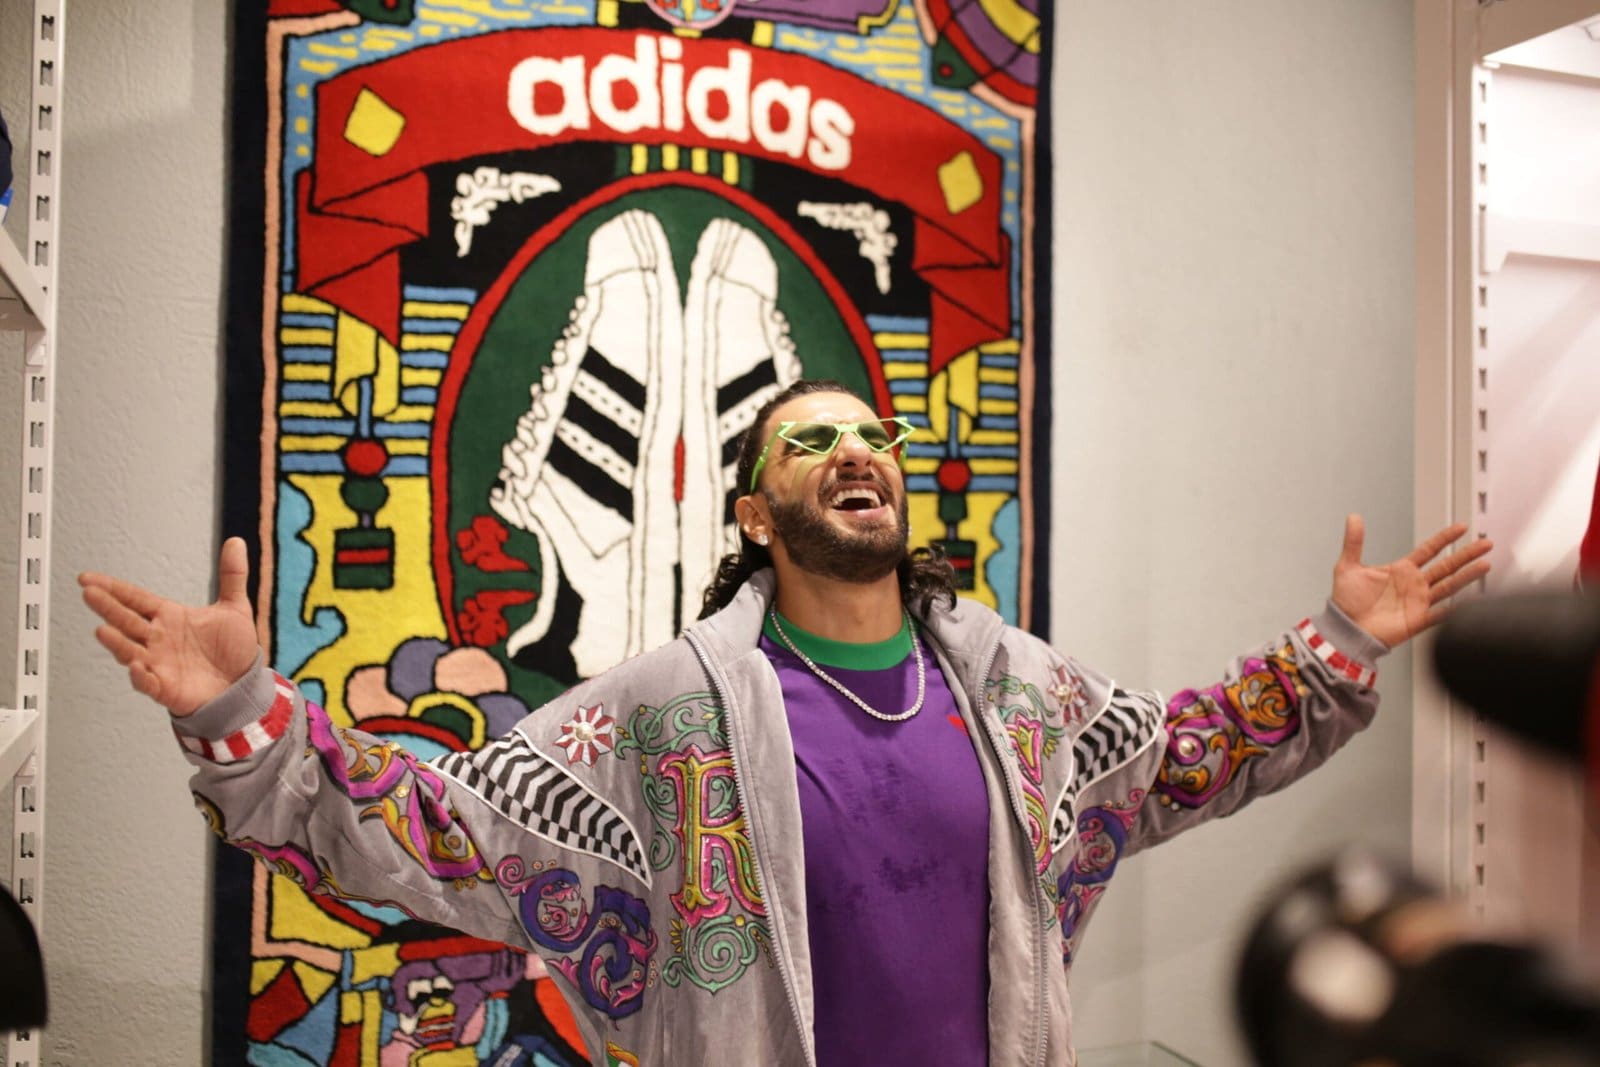 ADIDAS OPENS INDIA’S LARGEST FLAGSHIP STORE IN THE CAPITAL CITY WITH BOLLYWOOD SUPERSTAR RANVEER SINGH